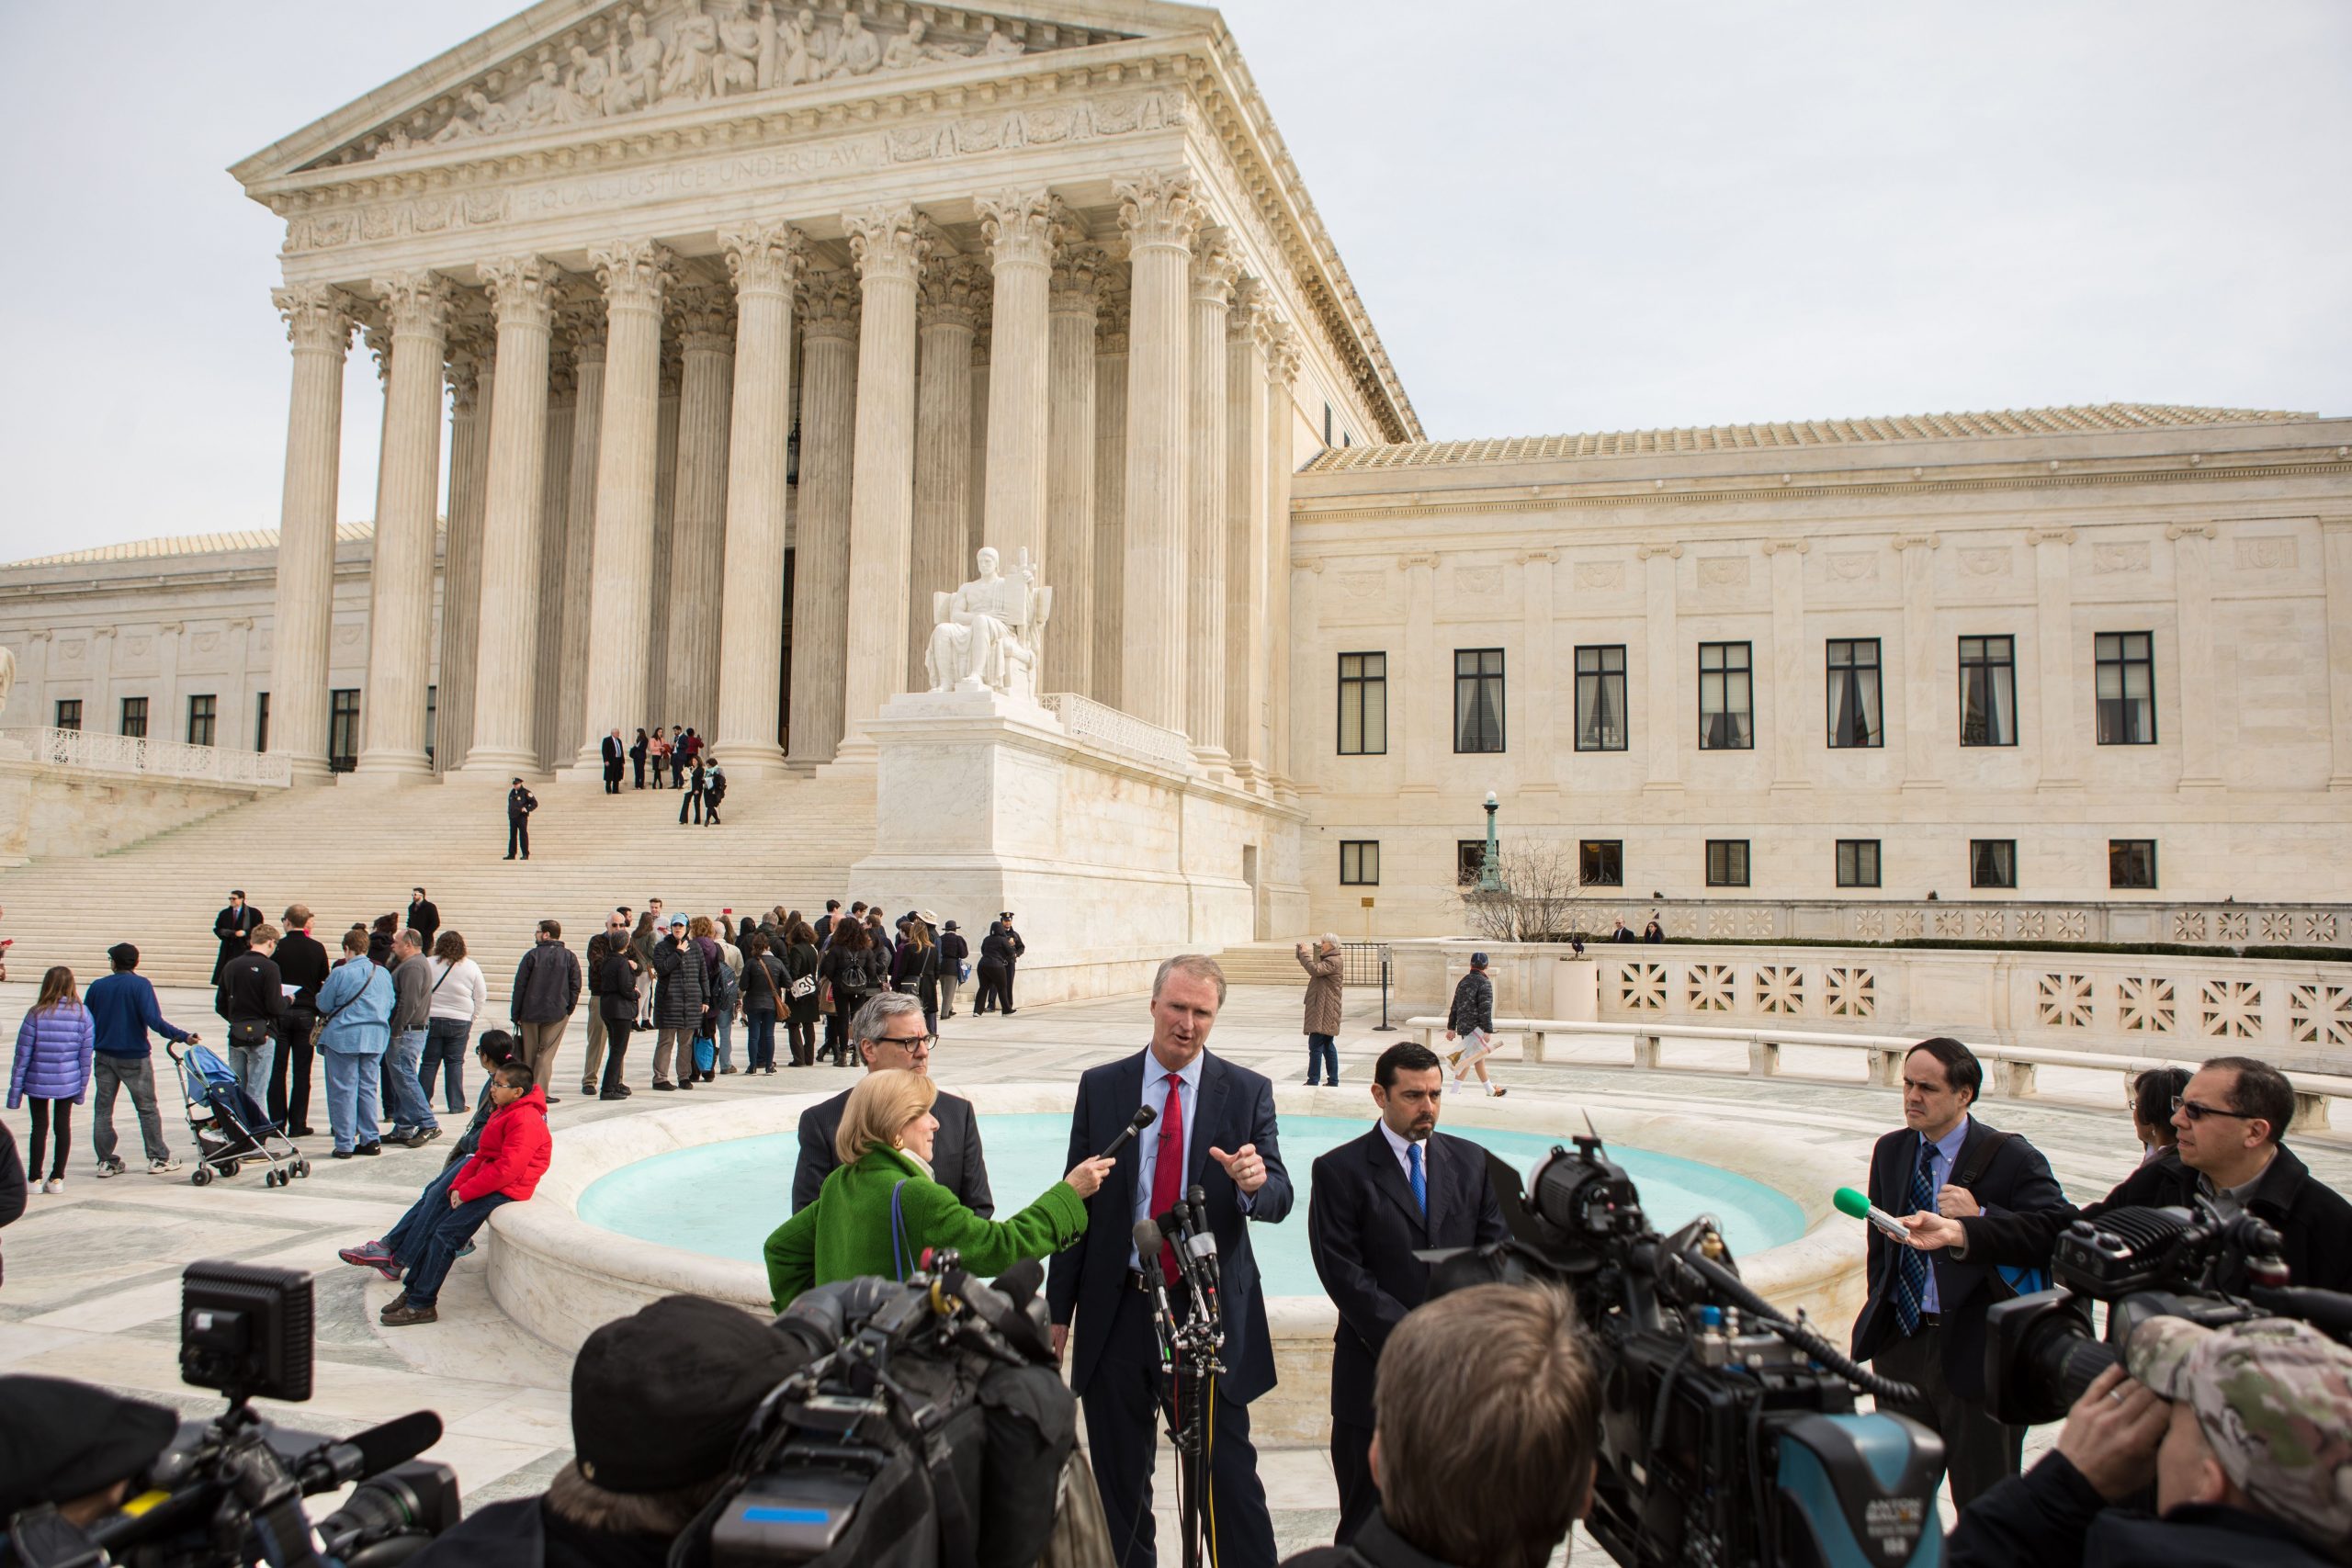 Group of journalists standing in front of the United States Supreme Court Building. Attorney Bob Hilliard is answering questions.